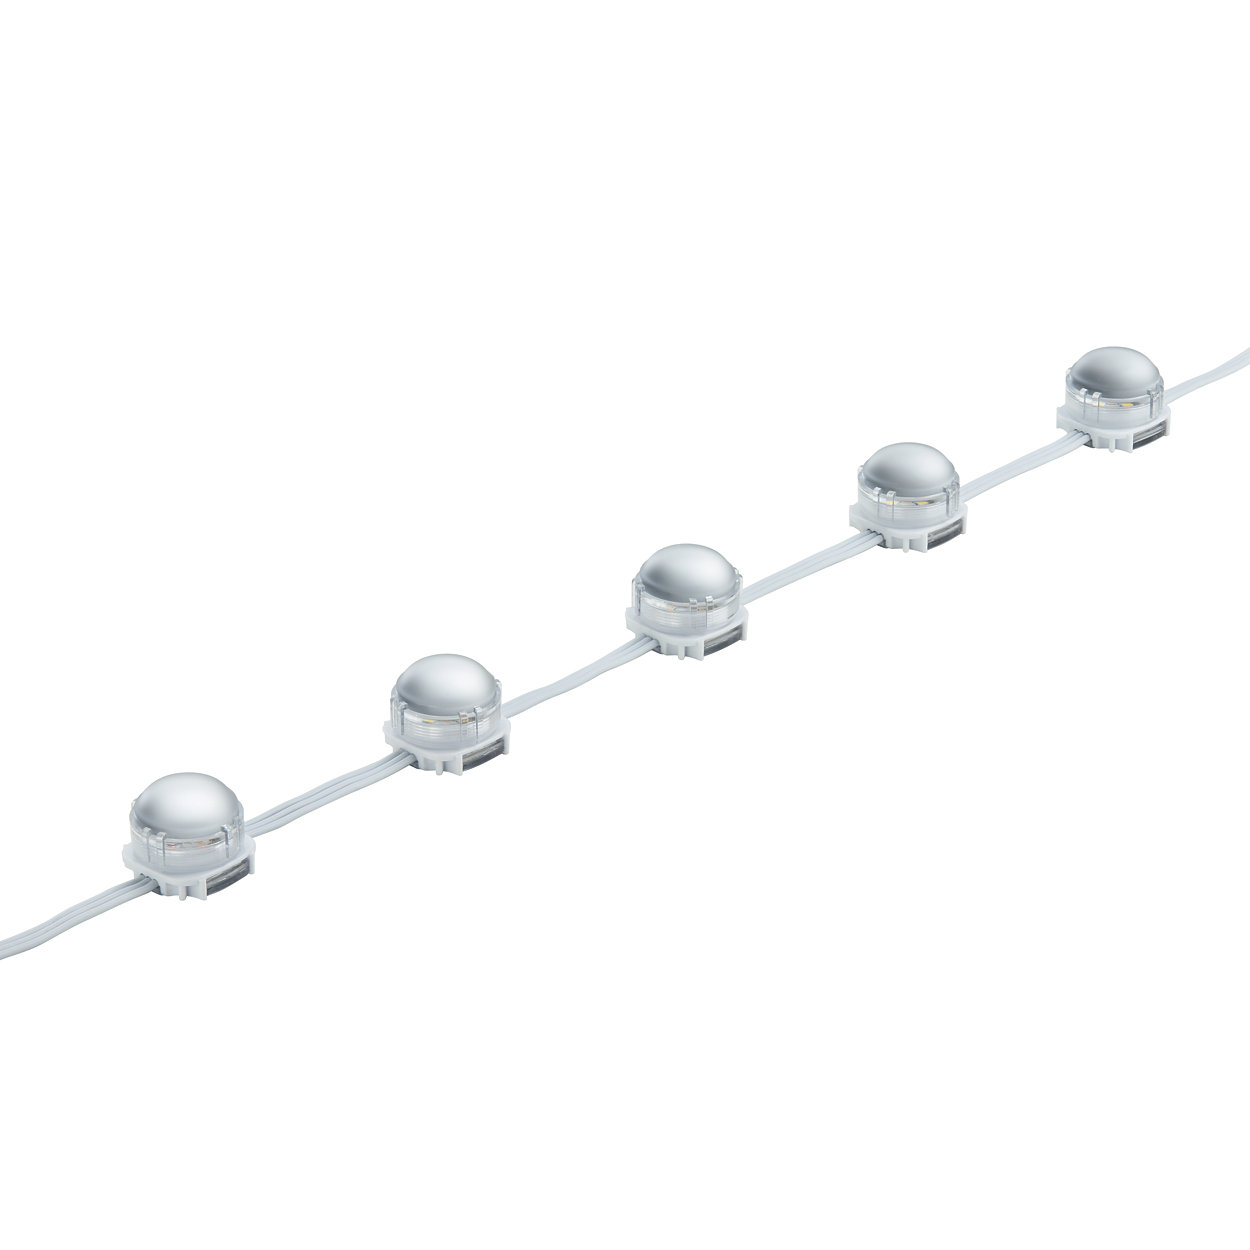 iW Flex Compact - Flexible strands of high-intensity LED nodes with tunable white light